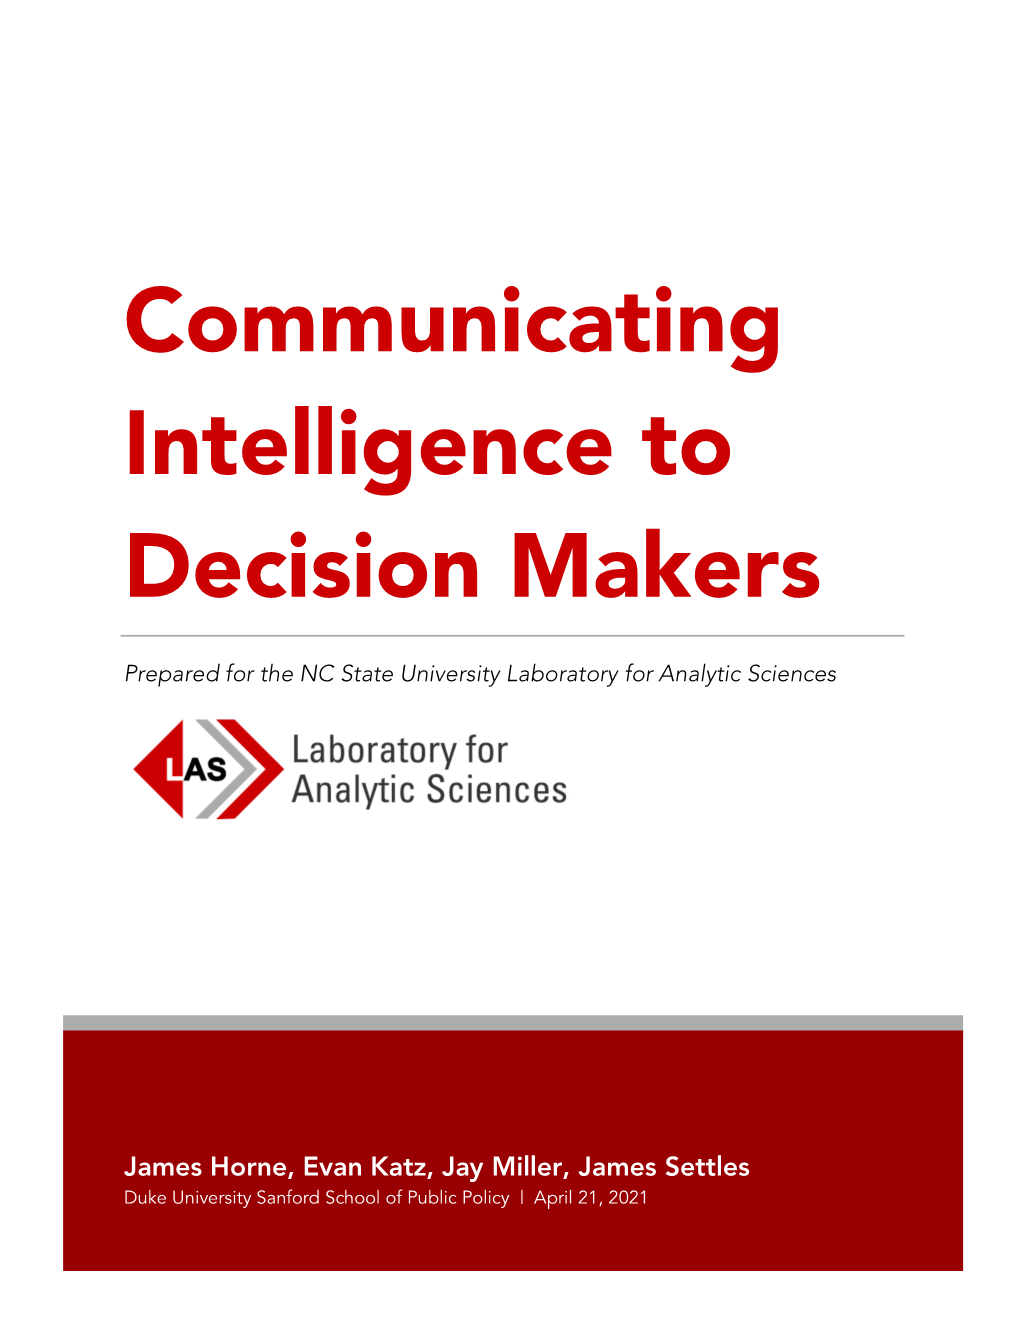 Communicating Intelligence to Decision Makers